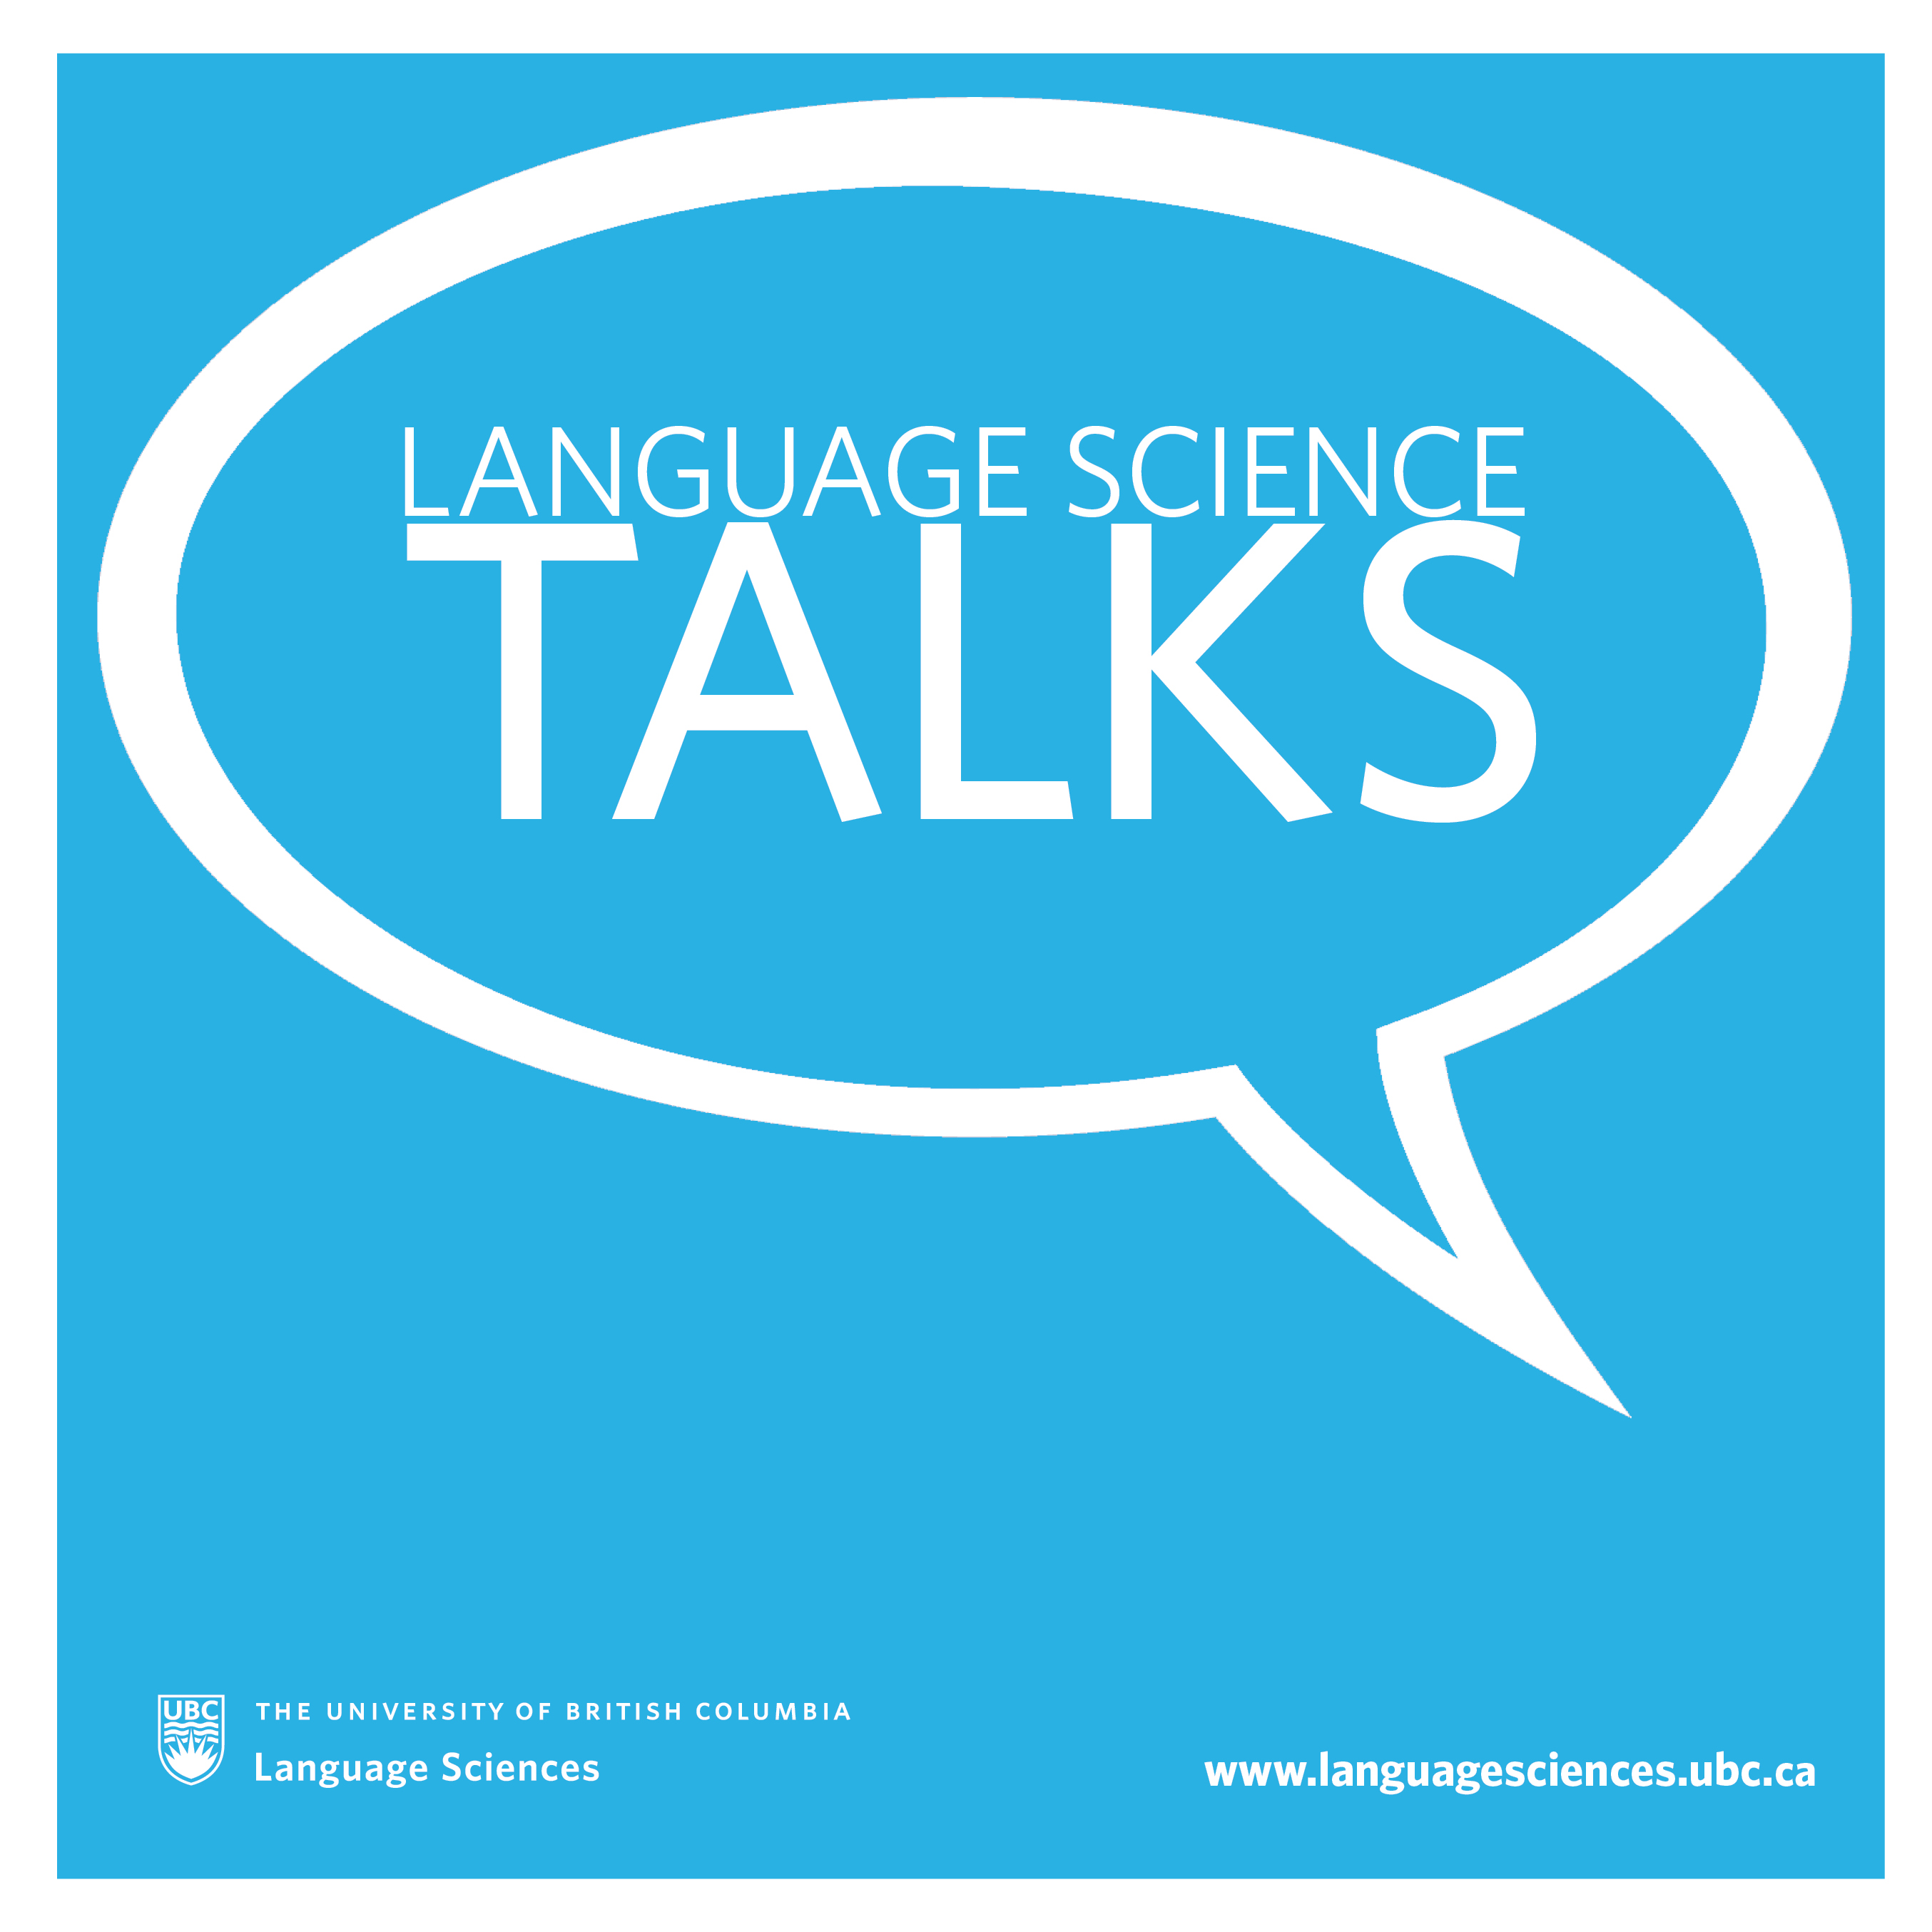 LangSci talks poster in light blue with a white speech bubble